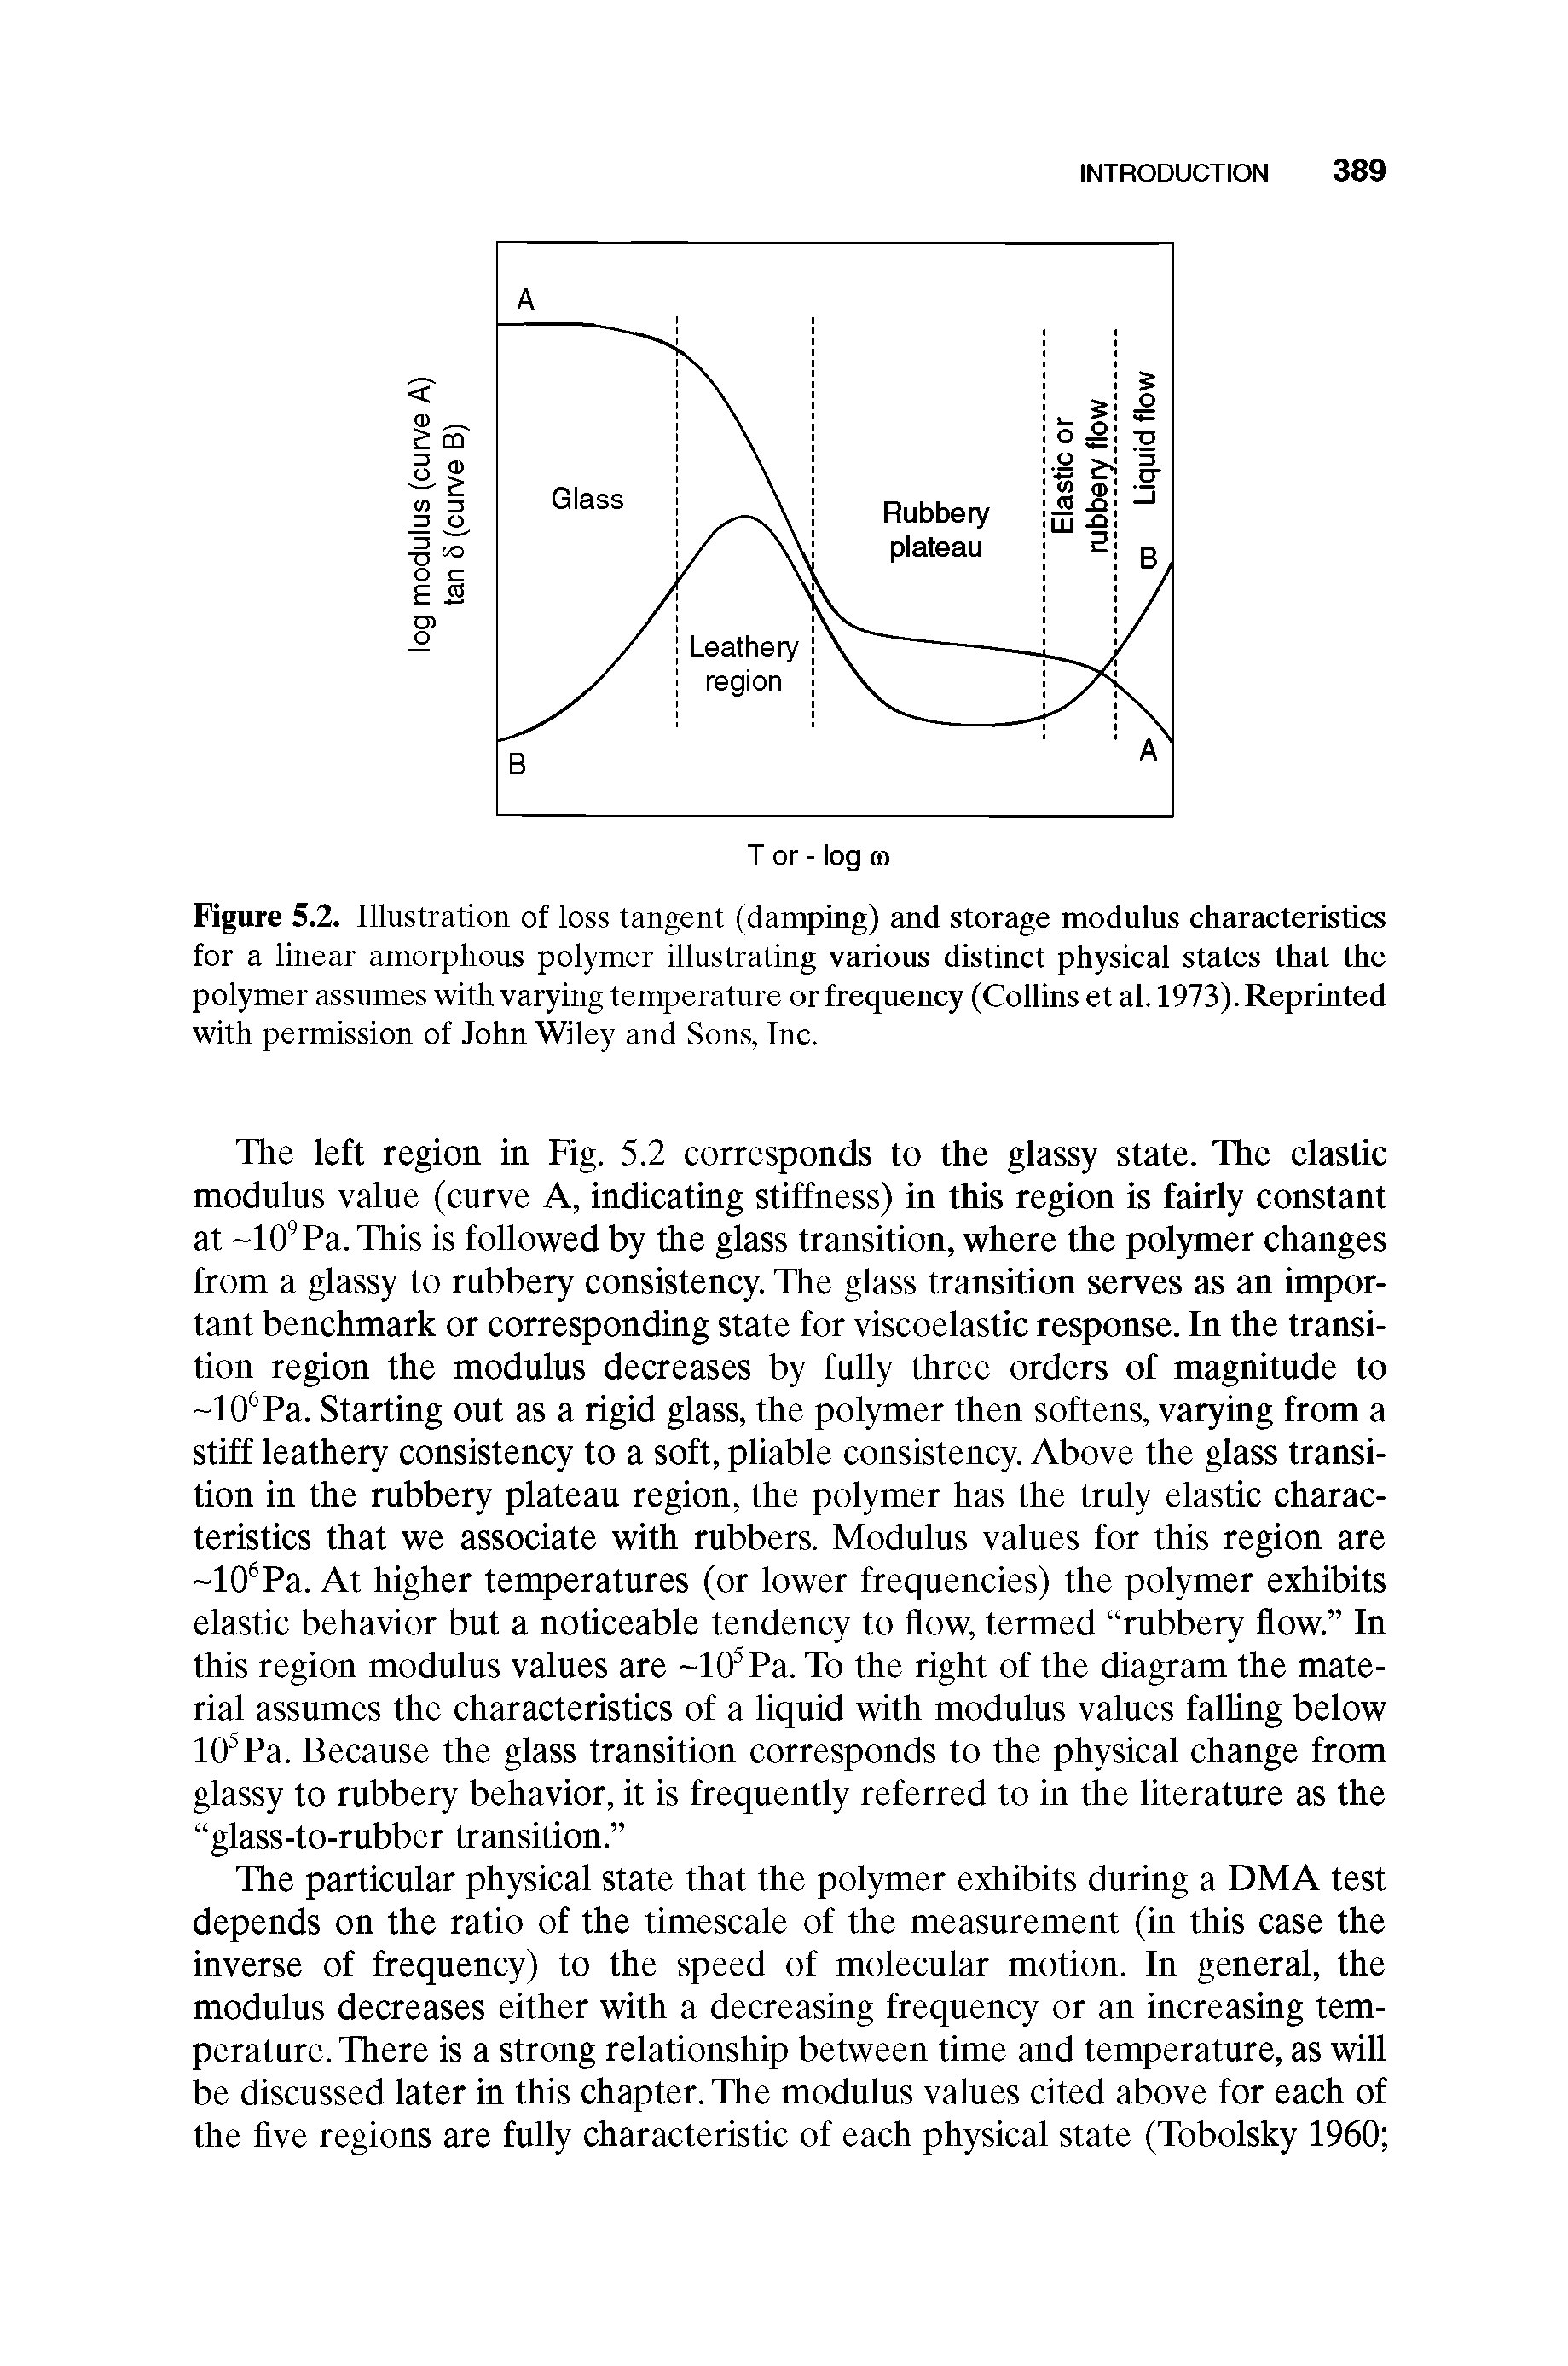 Figure 5.2. Illustration of loss tangent (damping) and storage modulus characteristics for a linear amorphous polymer illustrating various distinct physical states that the polymer assumes with varying temperature or frequency (Collins et al. 1973). Reprinted with permission of John Wiley and Sons, Inc.